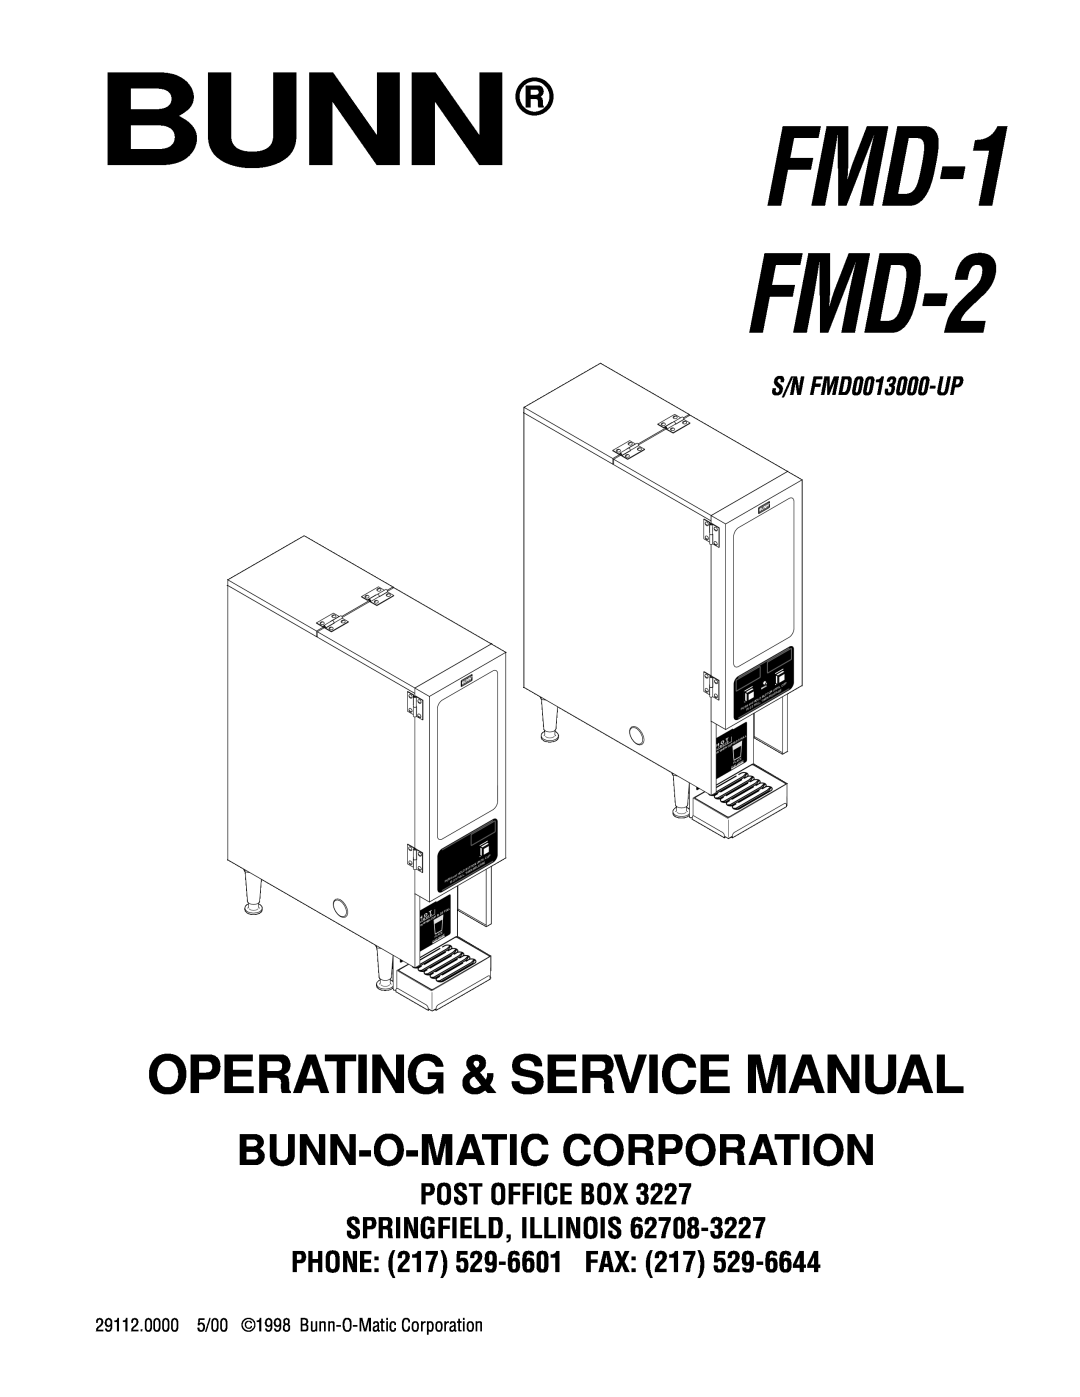 Bunn service manual FMD-1 FMD-2, Installation & Operating Guide, Bunn-O-Maticcorporation, S/N FMD0013000-UP 